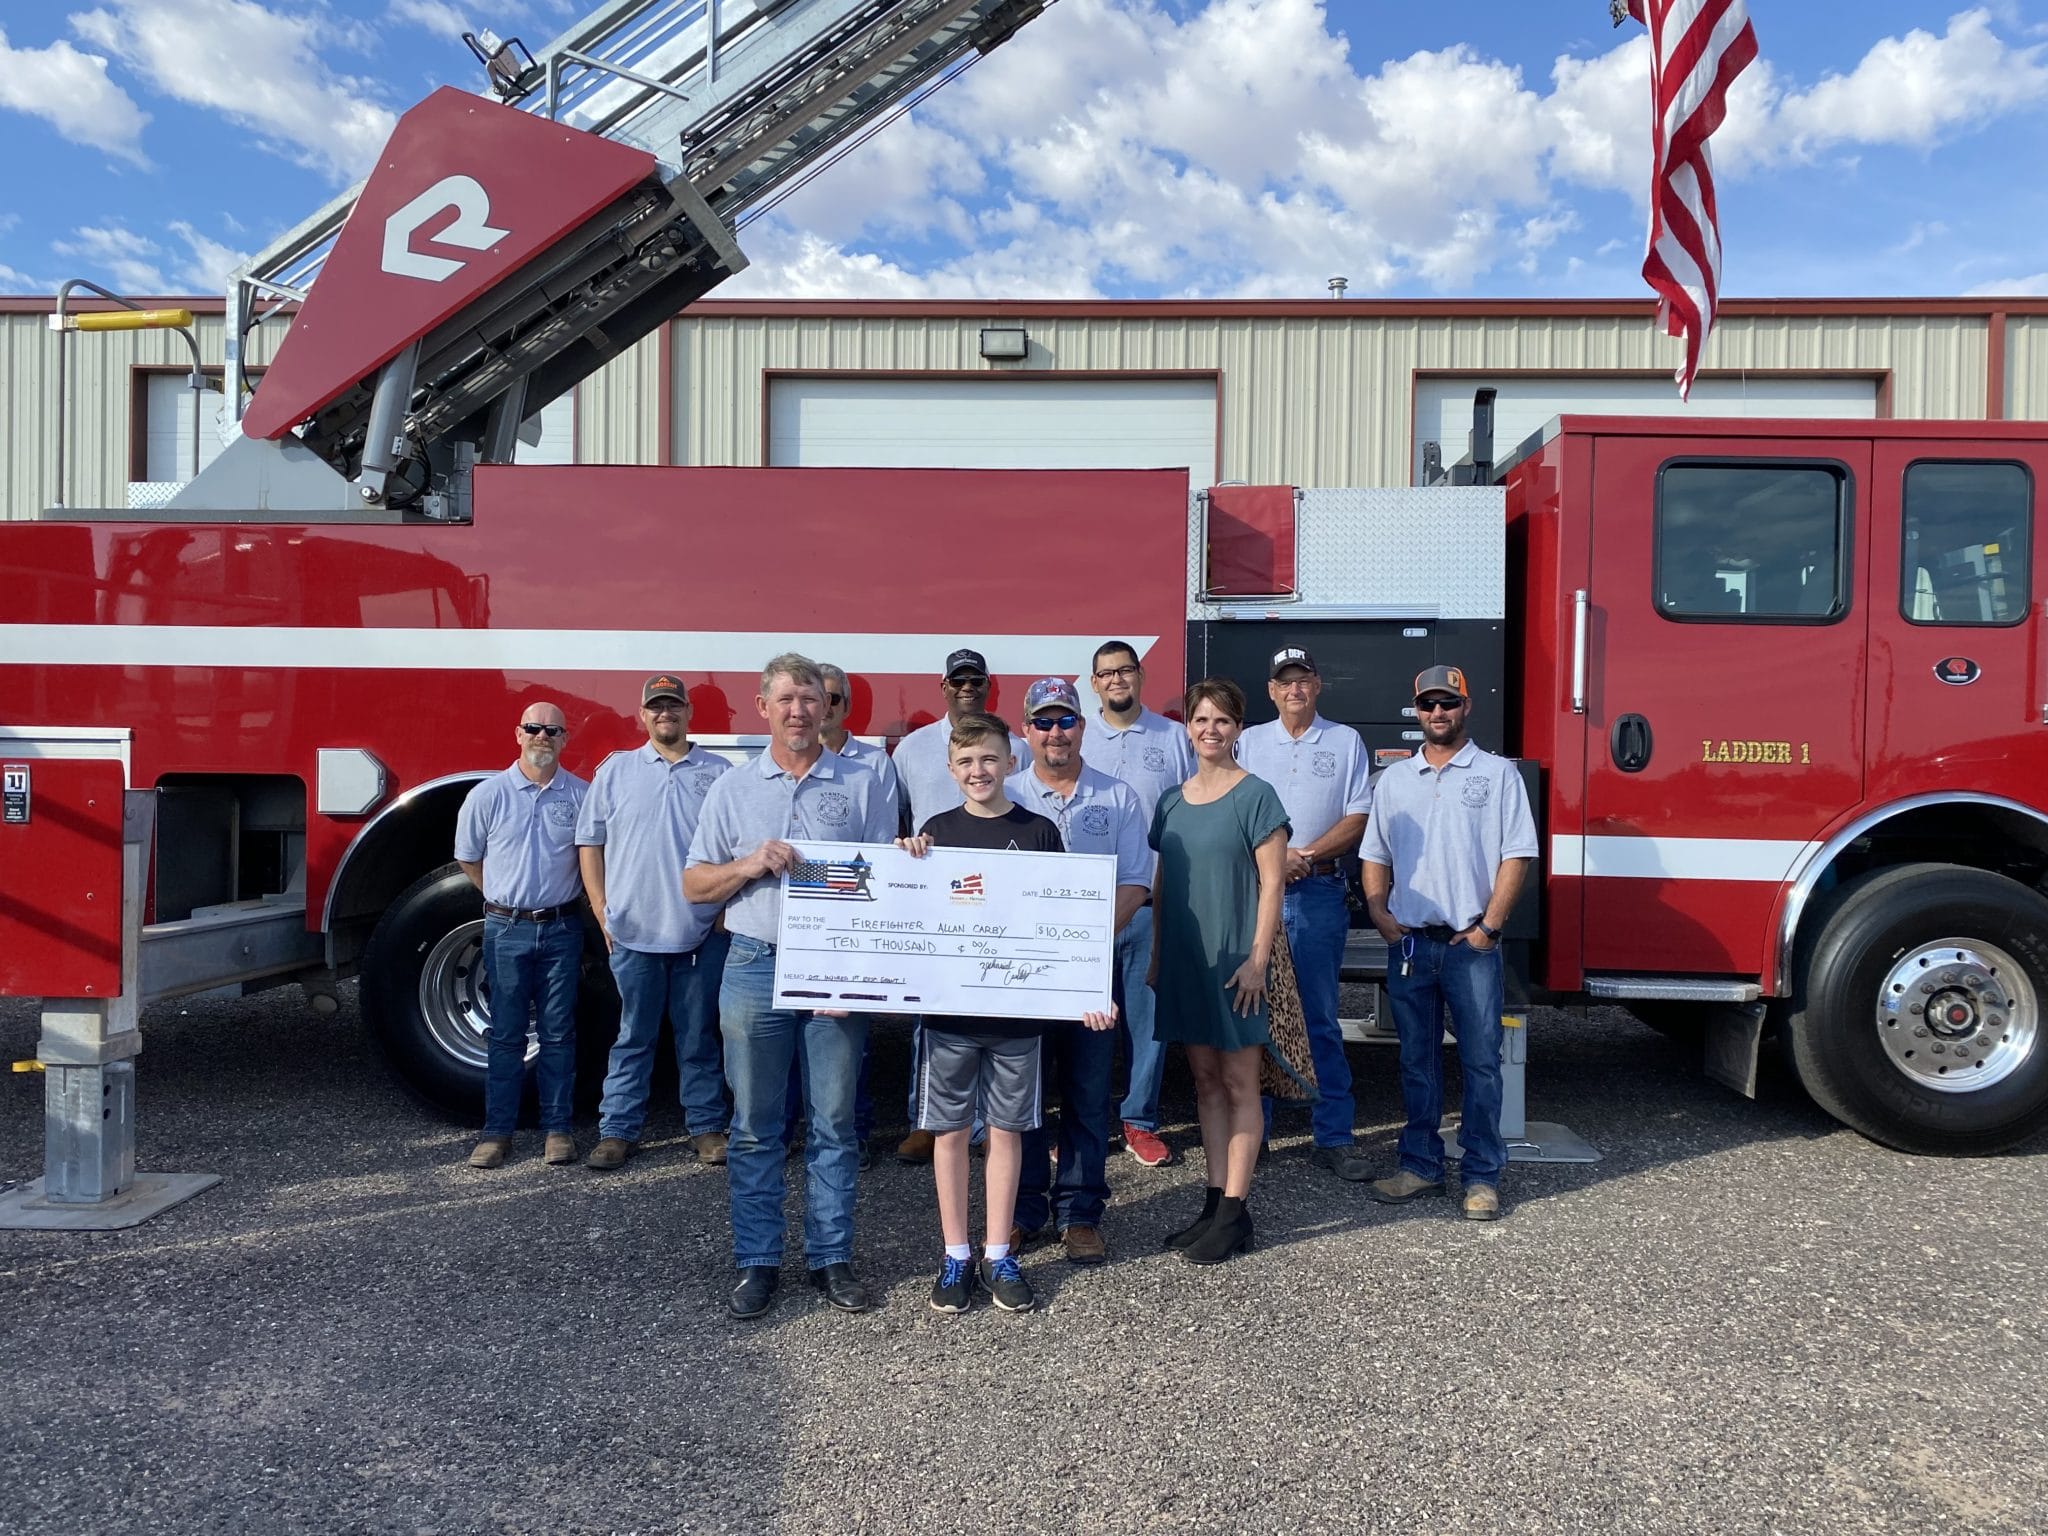 Firefighter Allan Carby was presented a grant for $10,000 by Running 4 Heroes and Homes for Heroes Foundation on October 23, 2021 at the Martin County Volunteer Fire House in Texas